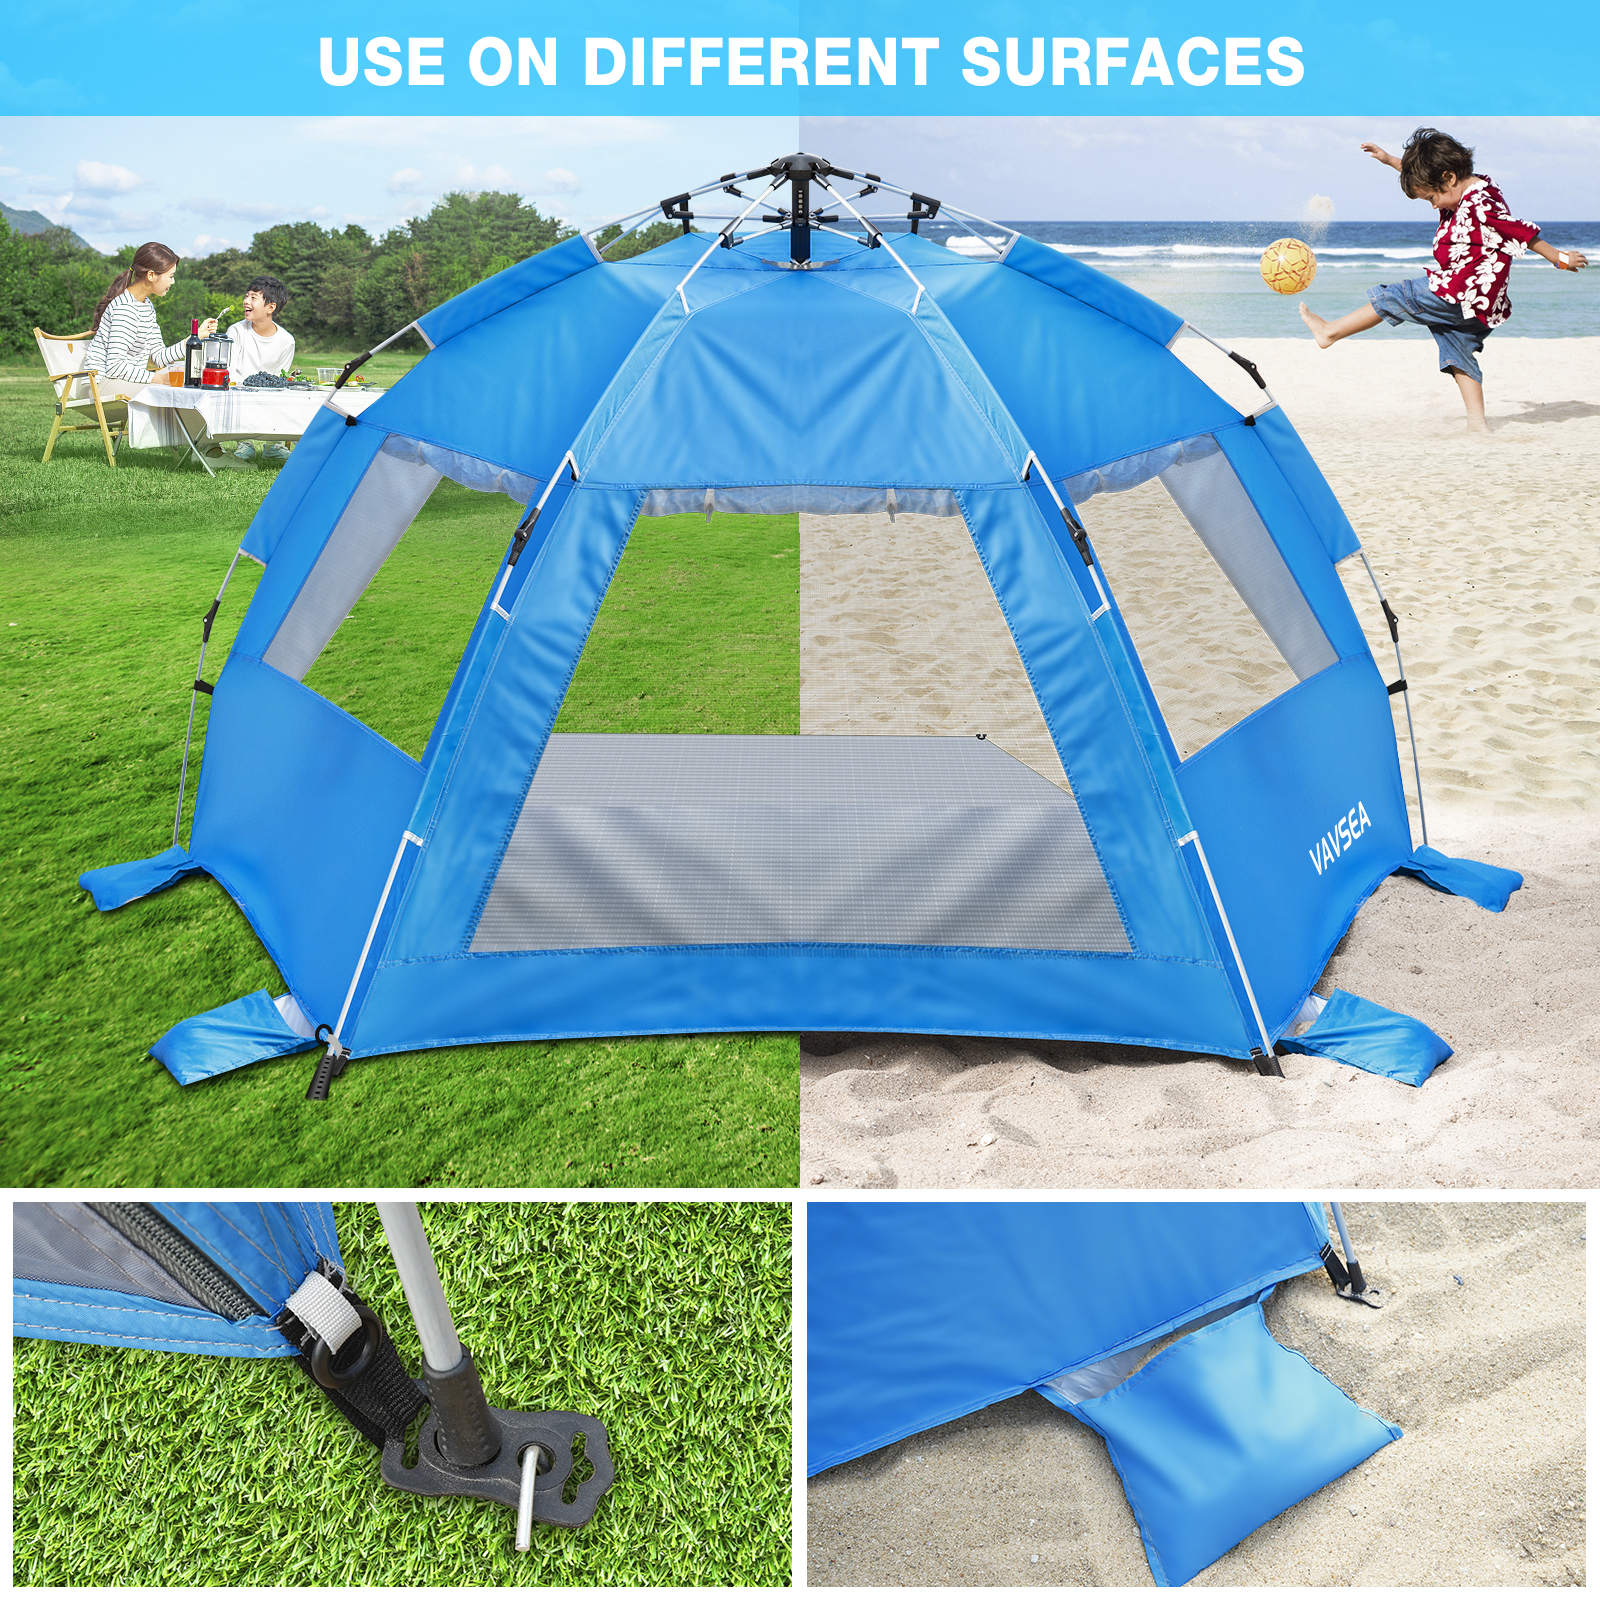 SUNOYAR Beach Tent, 4-6 Person Pop-up Beach Tent Sun Shelter, UPF 50+ UV Protection Portable Waterproof Beach Tent, Sunshade with Extendable Floor for Family, Fishing, Camping, Blue - image 3 of 8